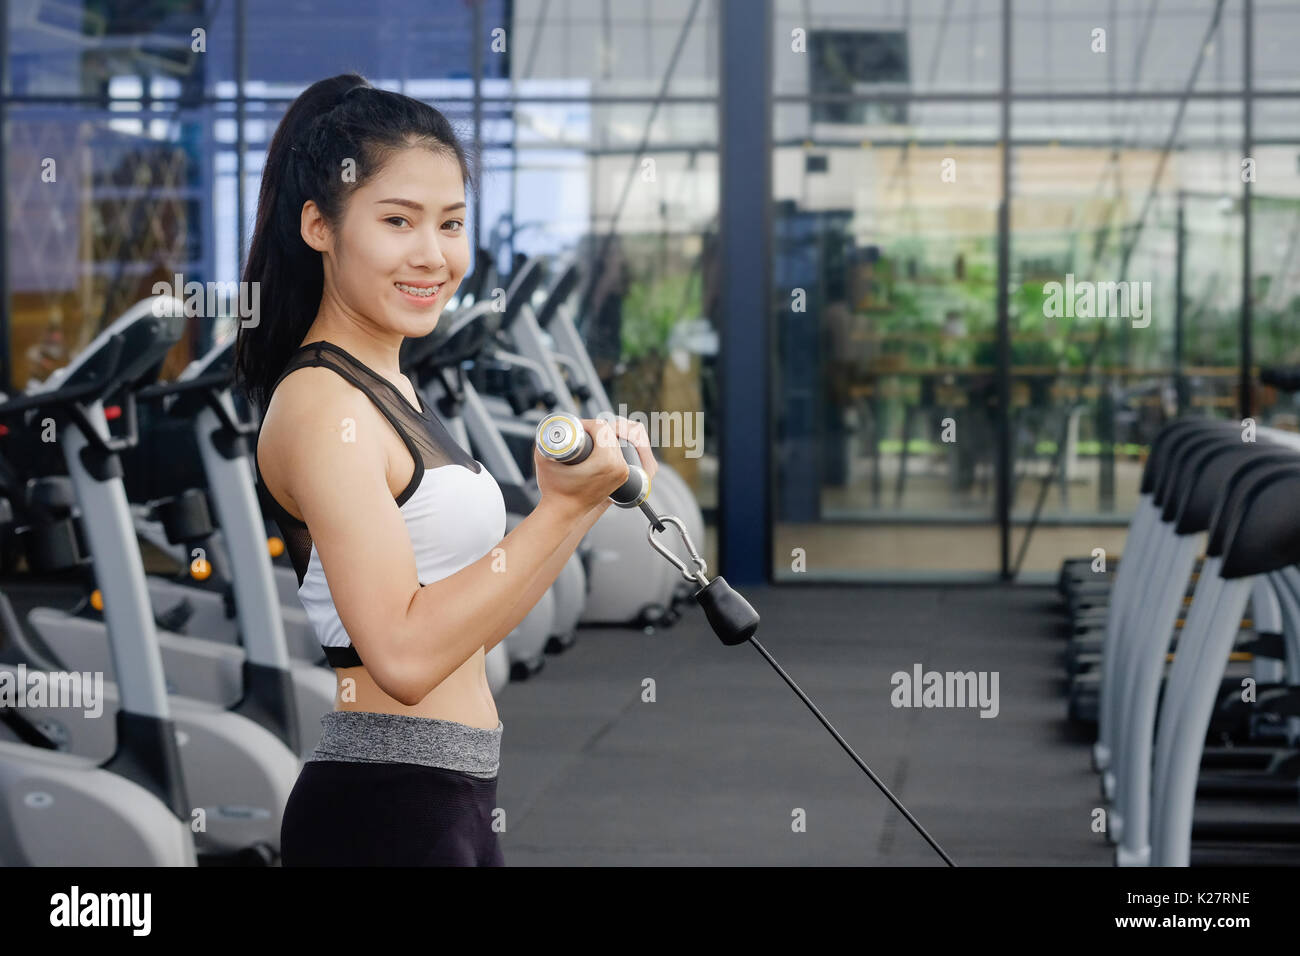 Asian woman workout body builder in sport fitness gym Stock Photo - Alamy